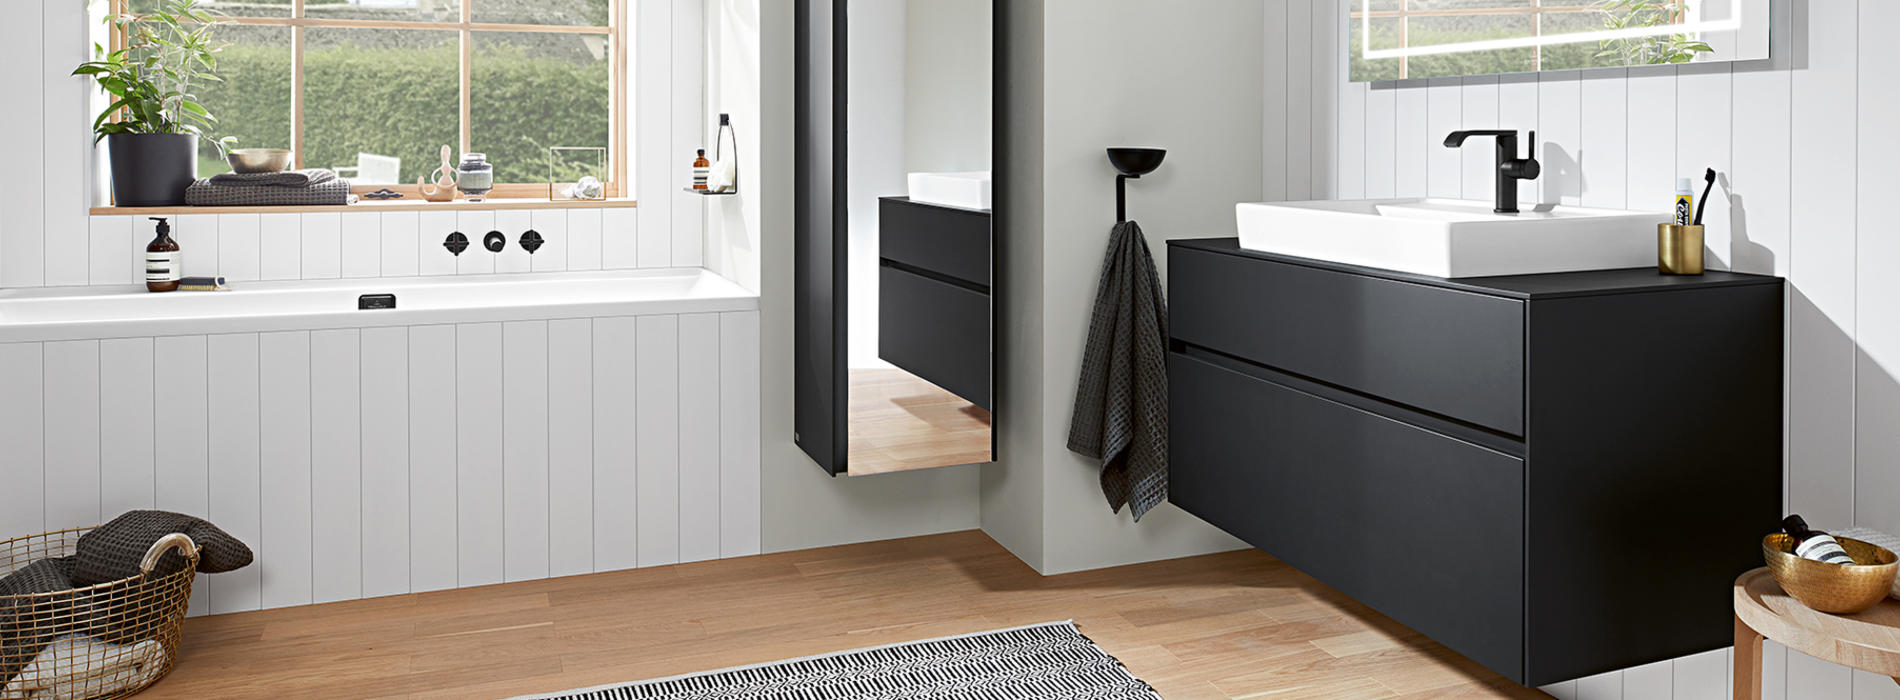 Villeroy & Boch Australia - Expertly Crafted Bathroom & Kitchen Products